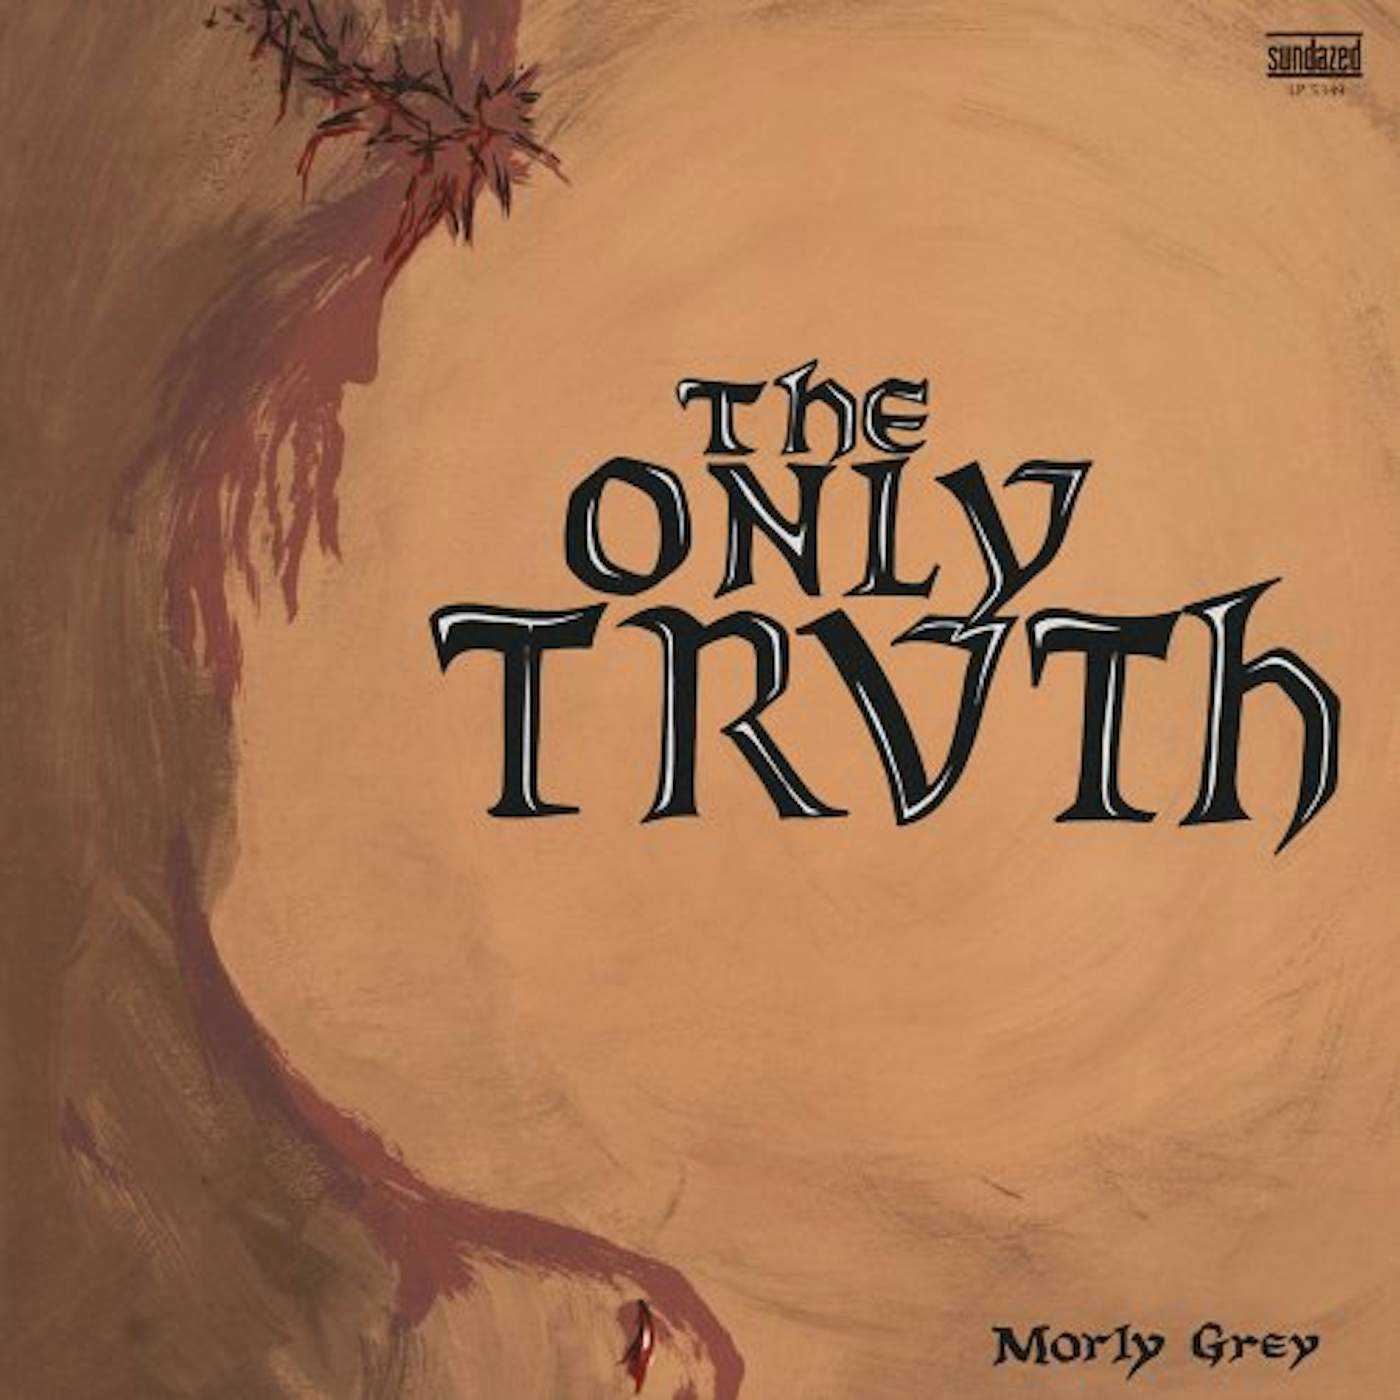 Morly Grey ONLY TRUTH CD